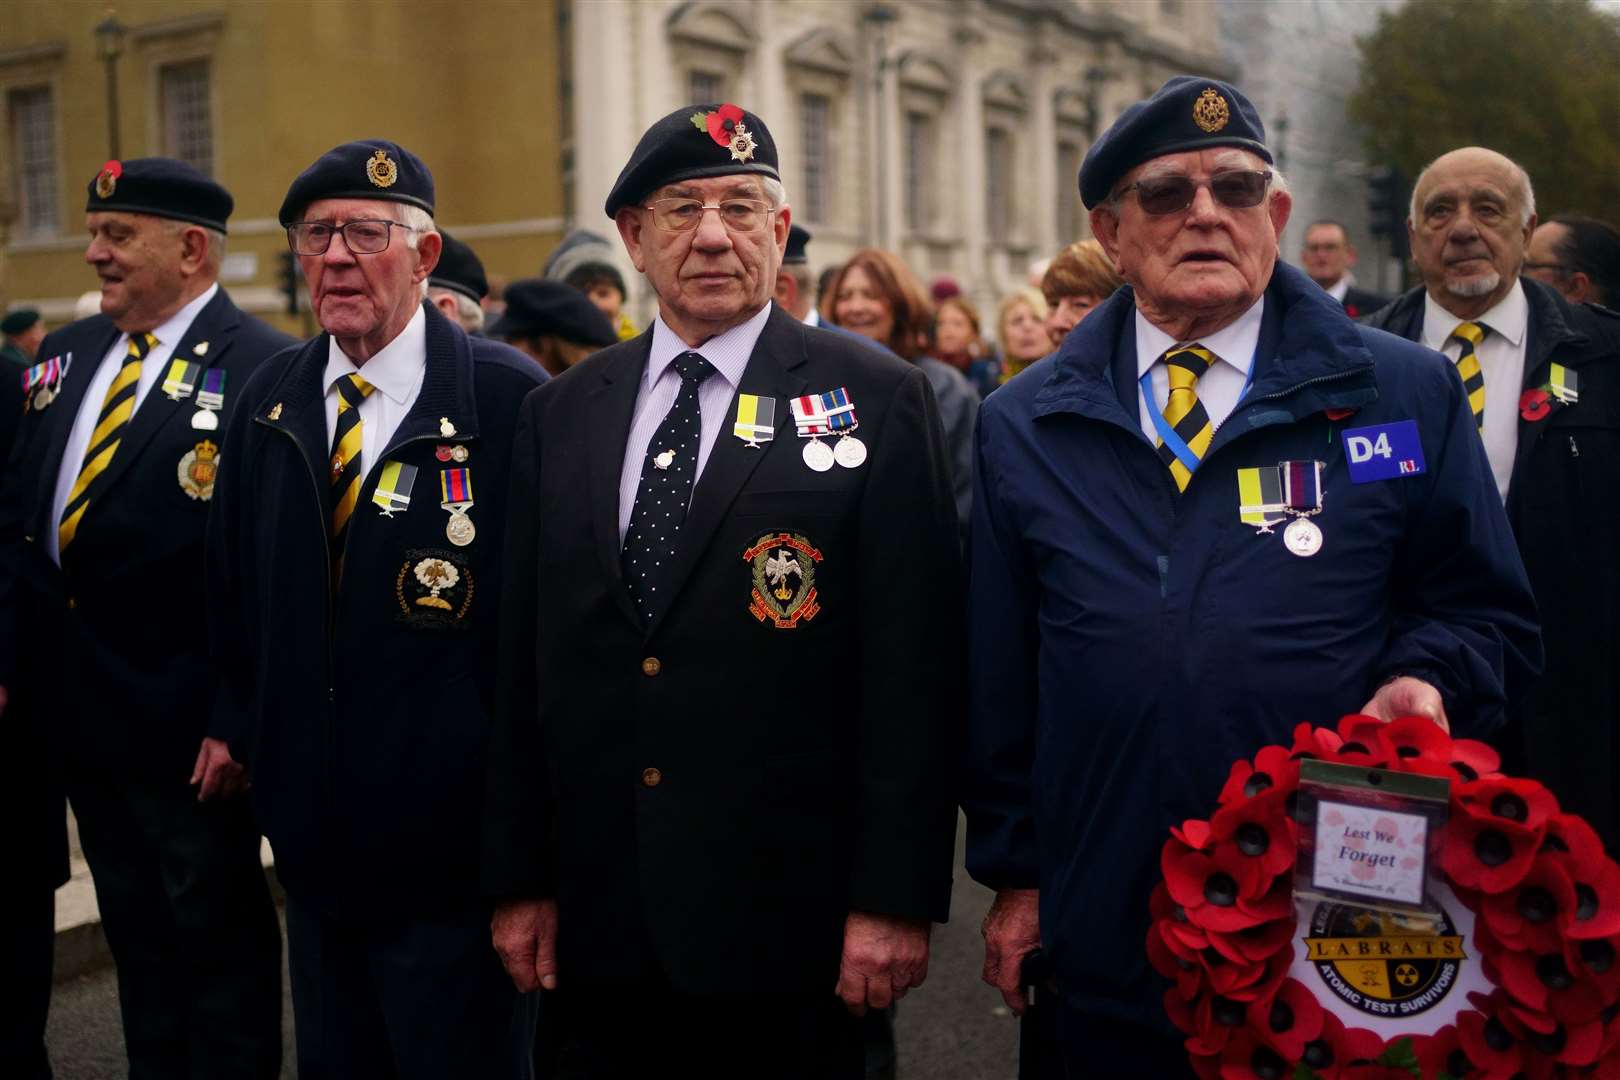 Nuclear test veterans wearing the “missing medal” at the Remembrance Sunday service at the Cenotaph (Victoria Jones/PA Wire)